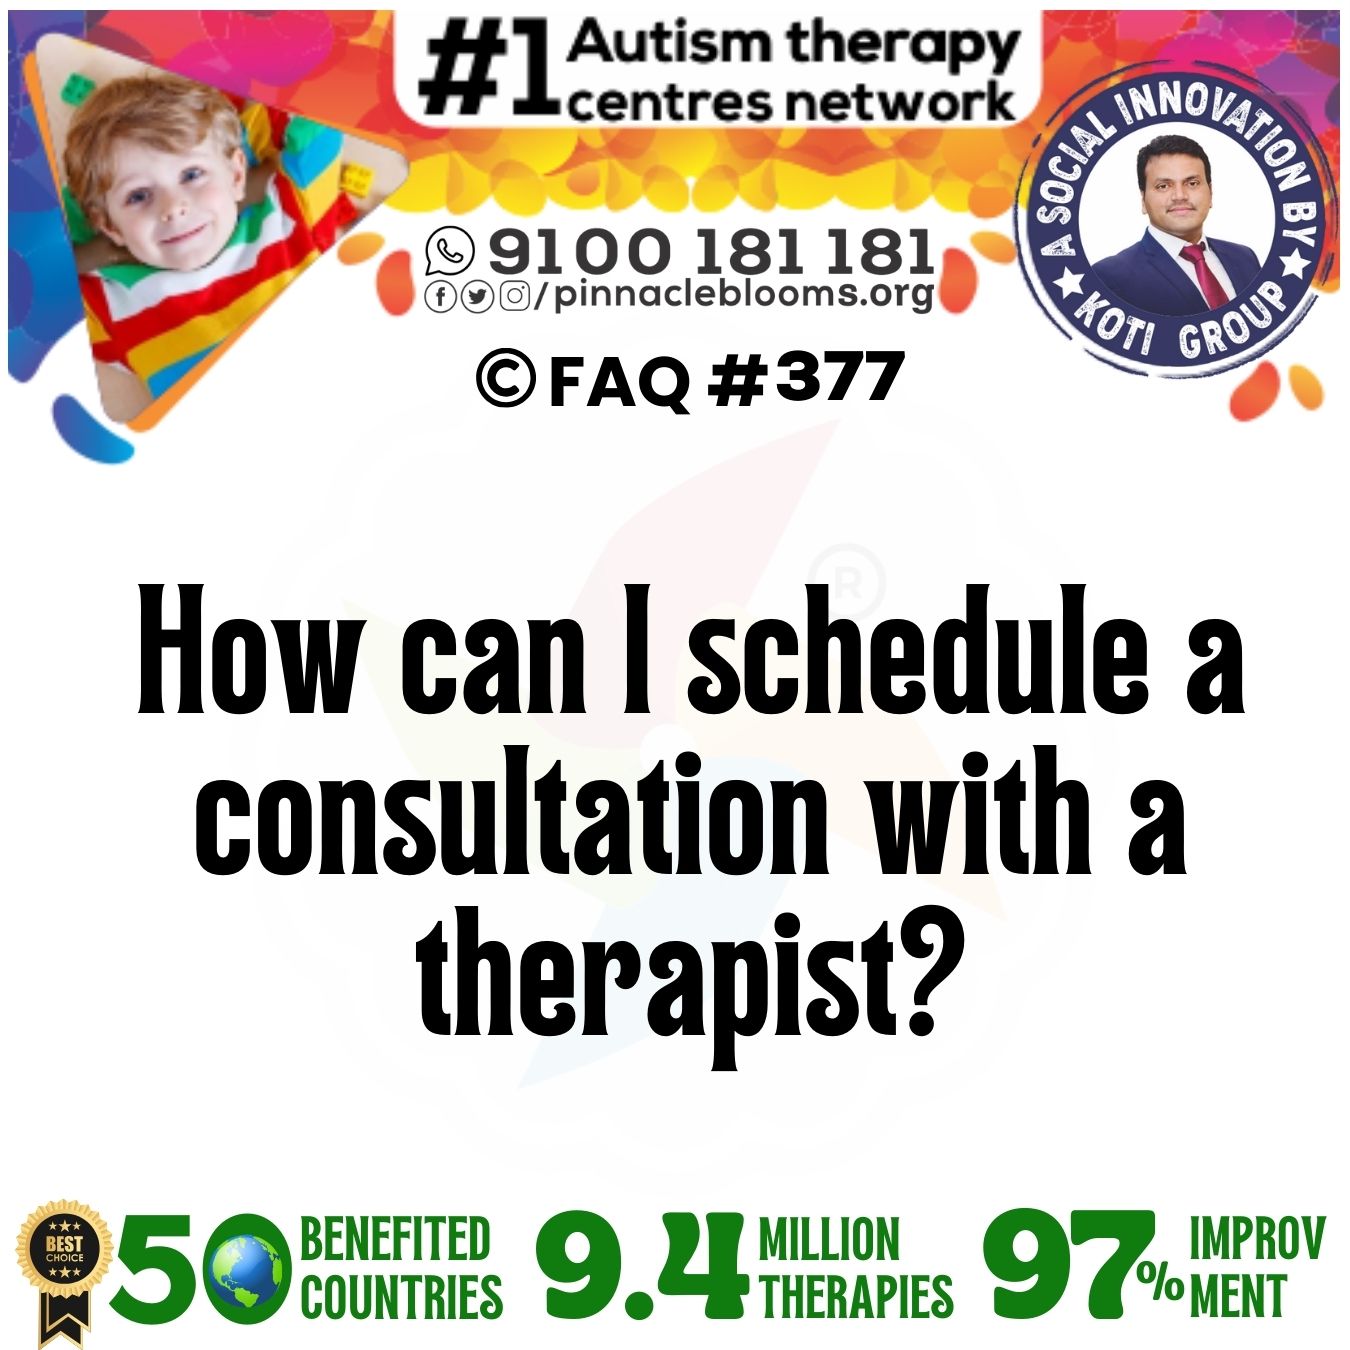 How can I schedule a consultation with a therapist?